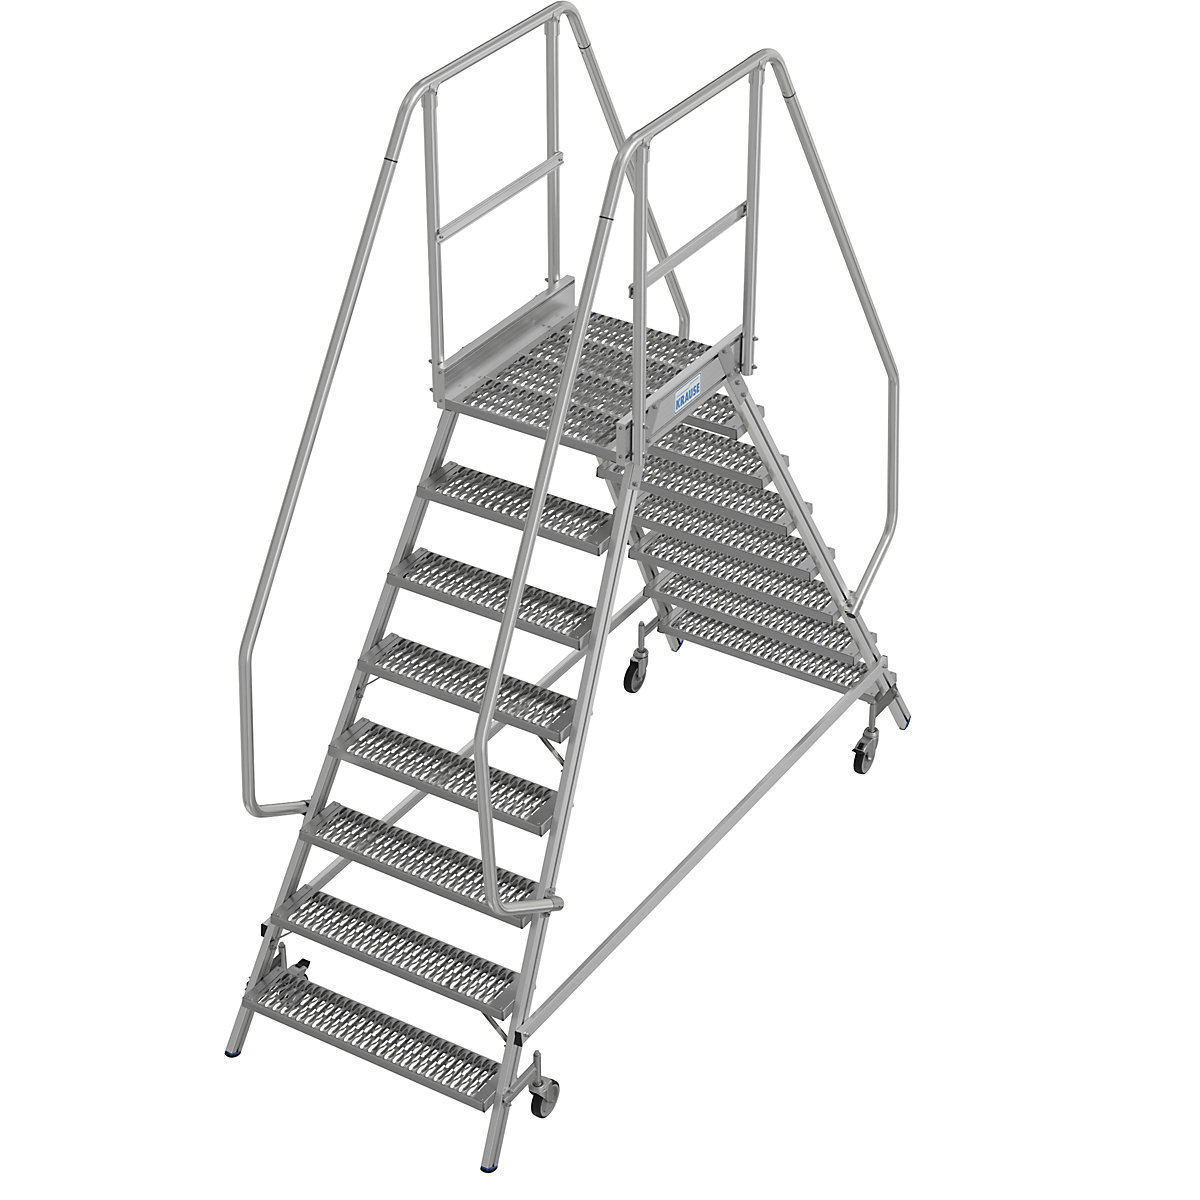 Mobile safety steps with R13 anti-slip properties – KRAUSE, with double sided access, 2x8 steps incl. platform-2